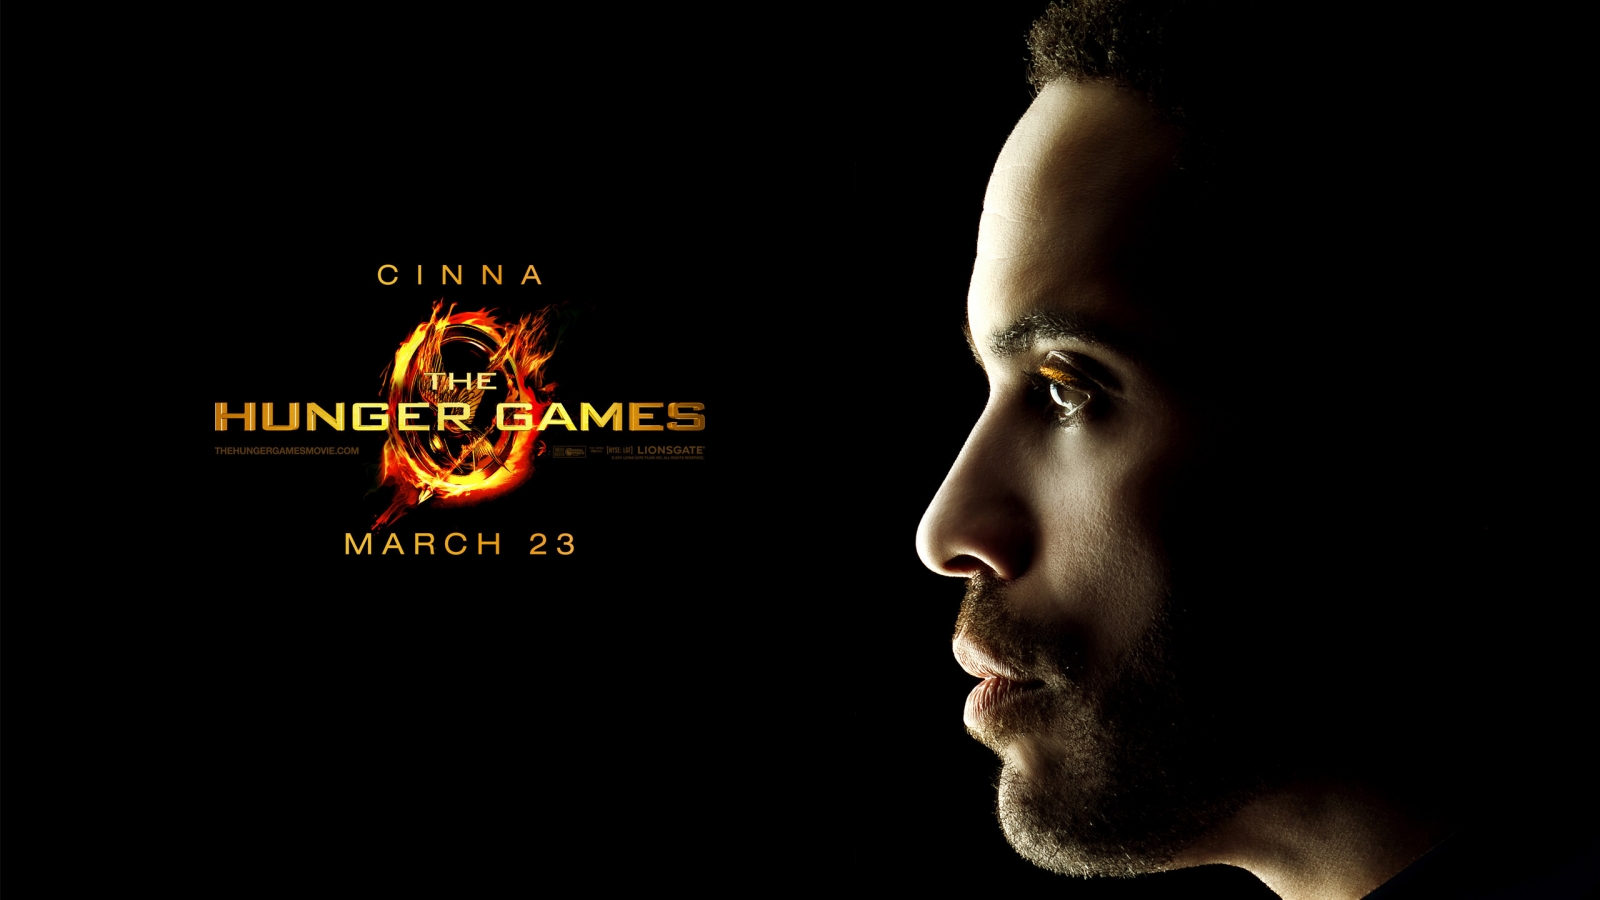 The Hunger Games Cinna for 1600 x 900 HDTV resolution